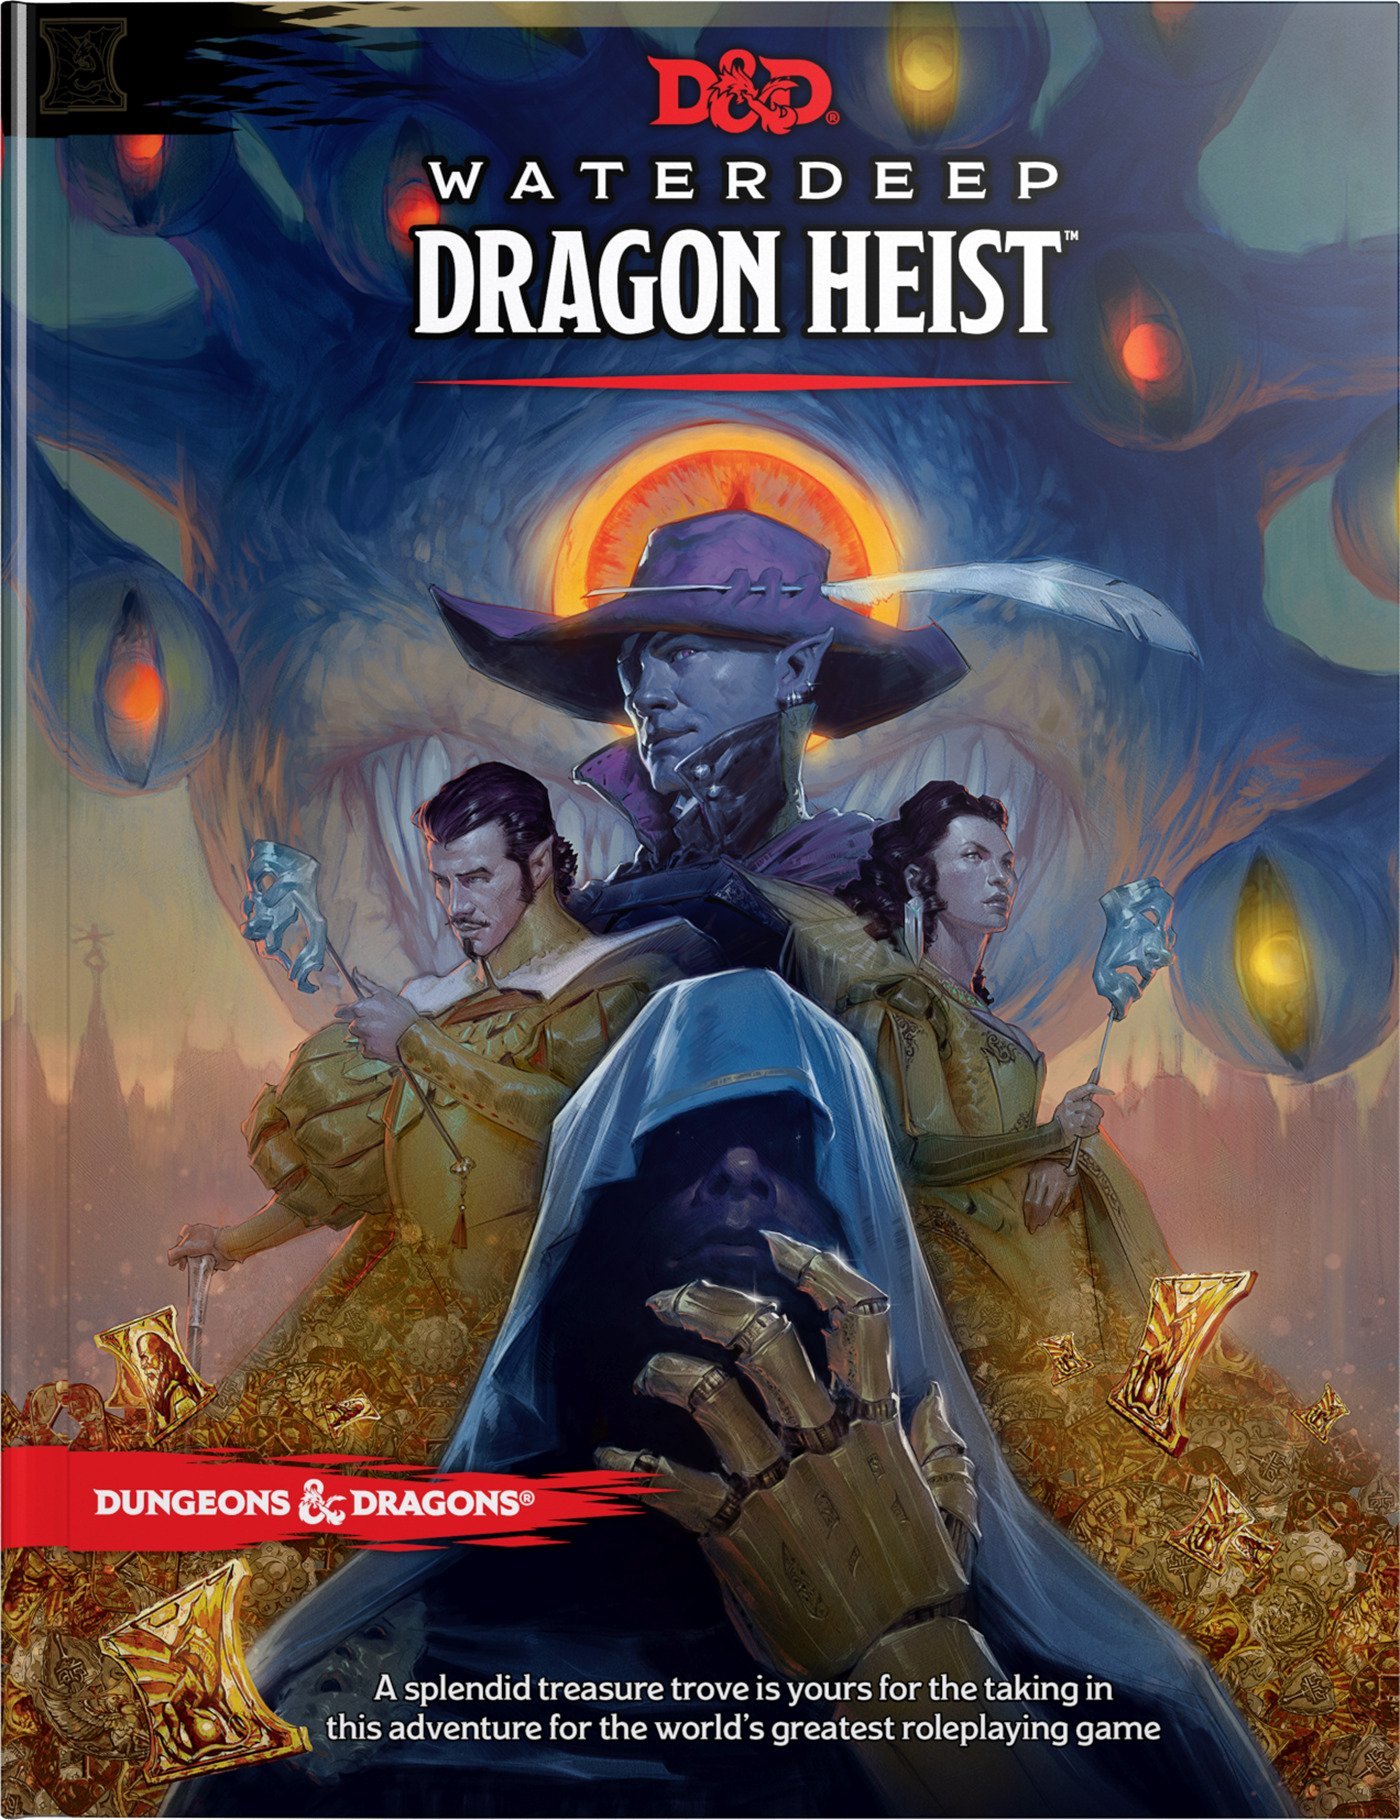 Dungeons and Dragons - Waterdeep Dragon Heist Book (D&D) (English)